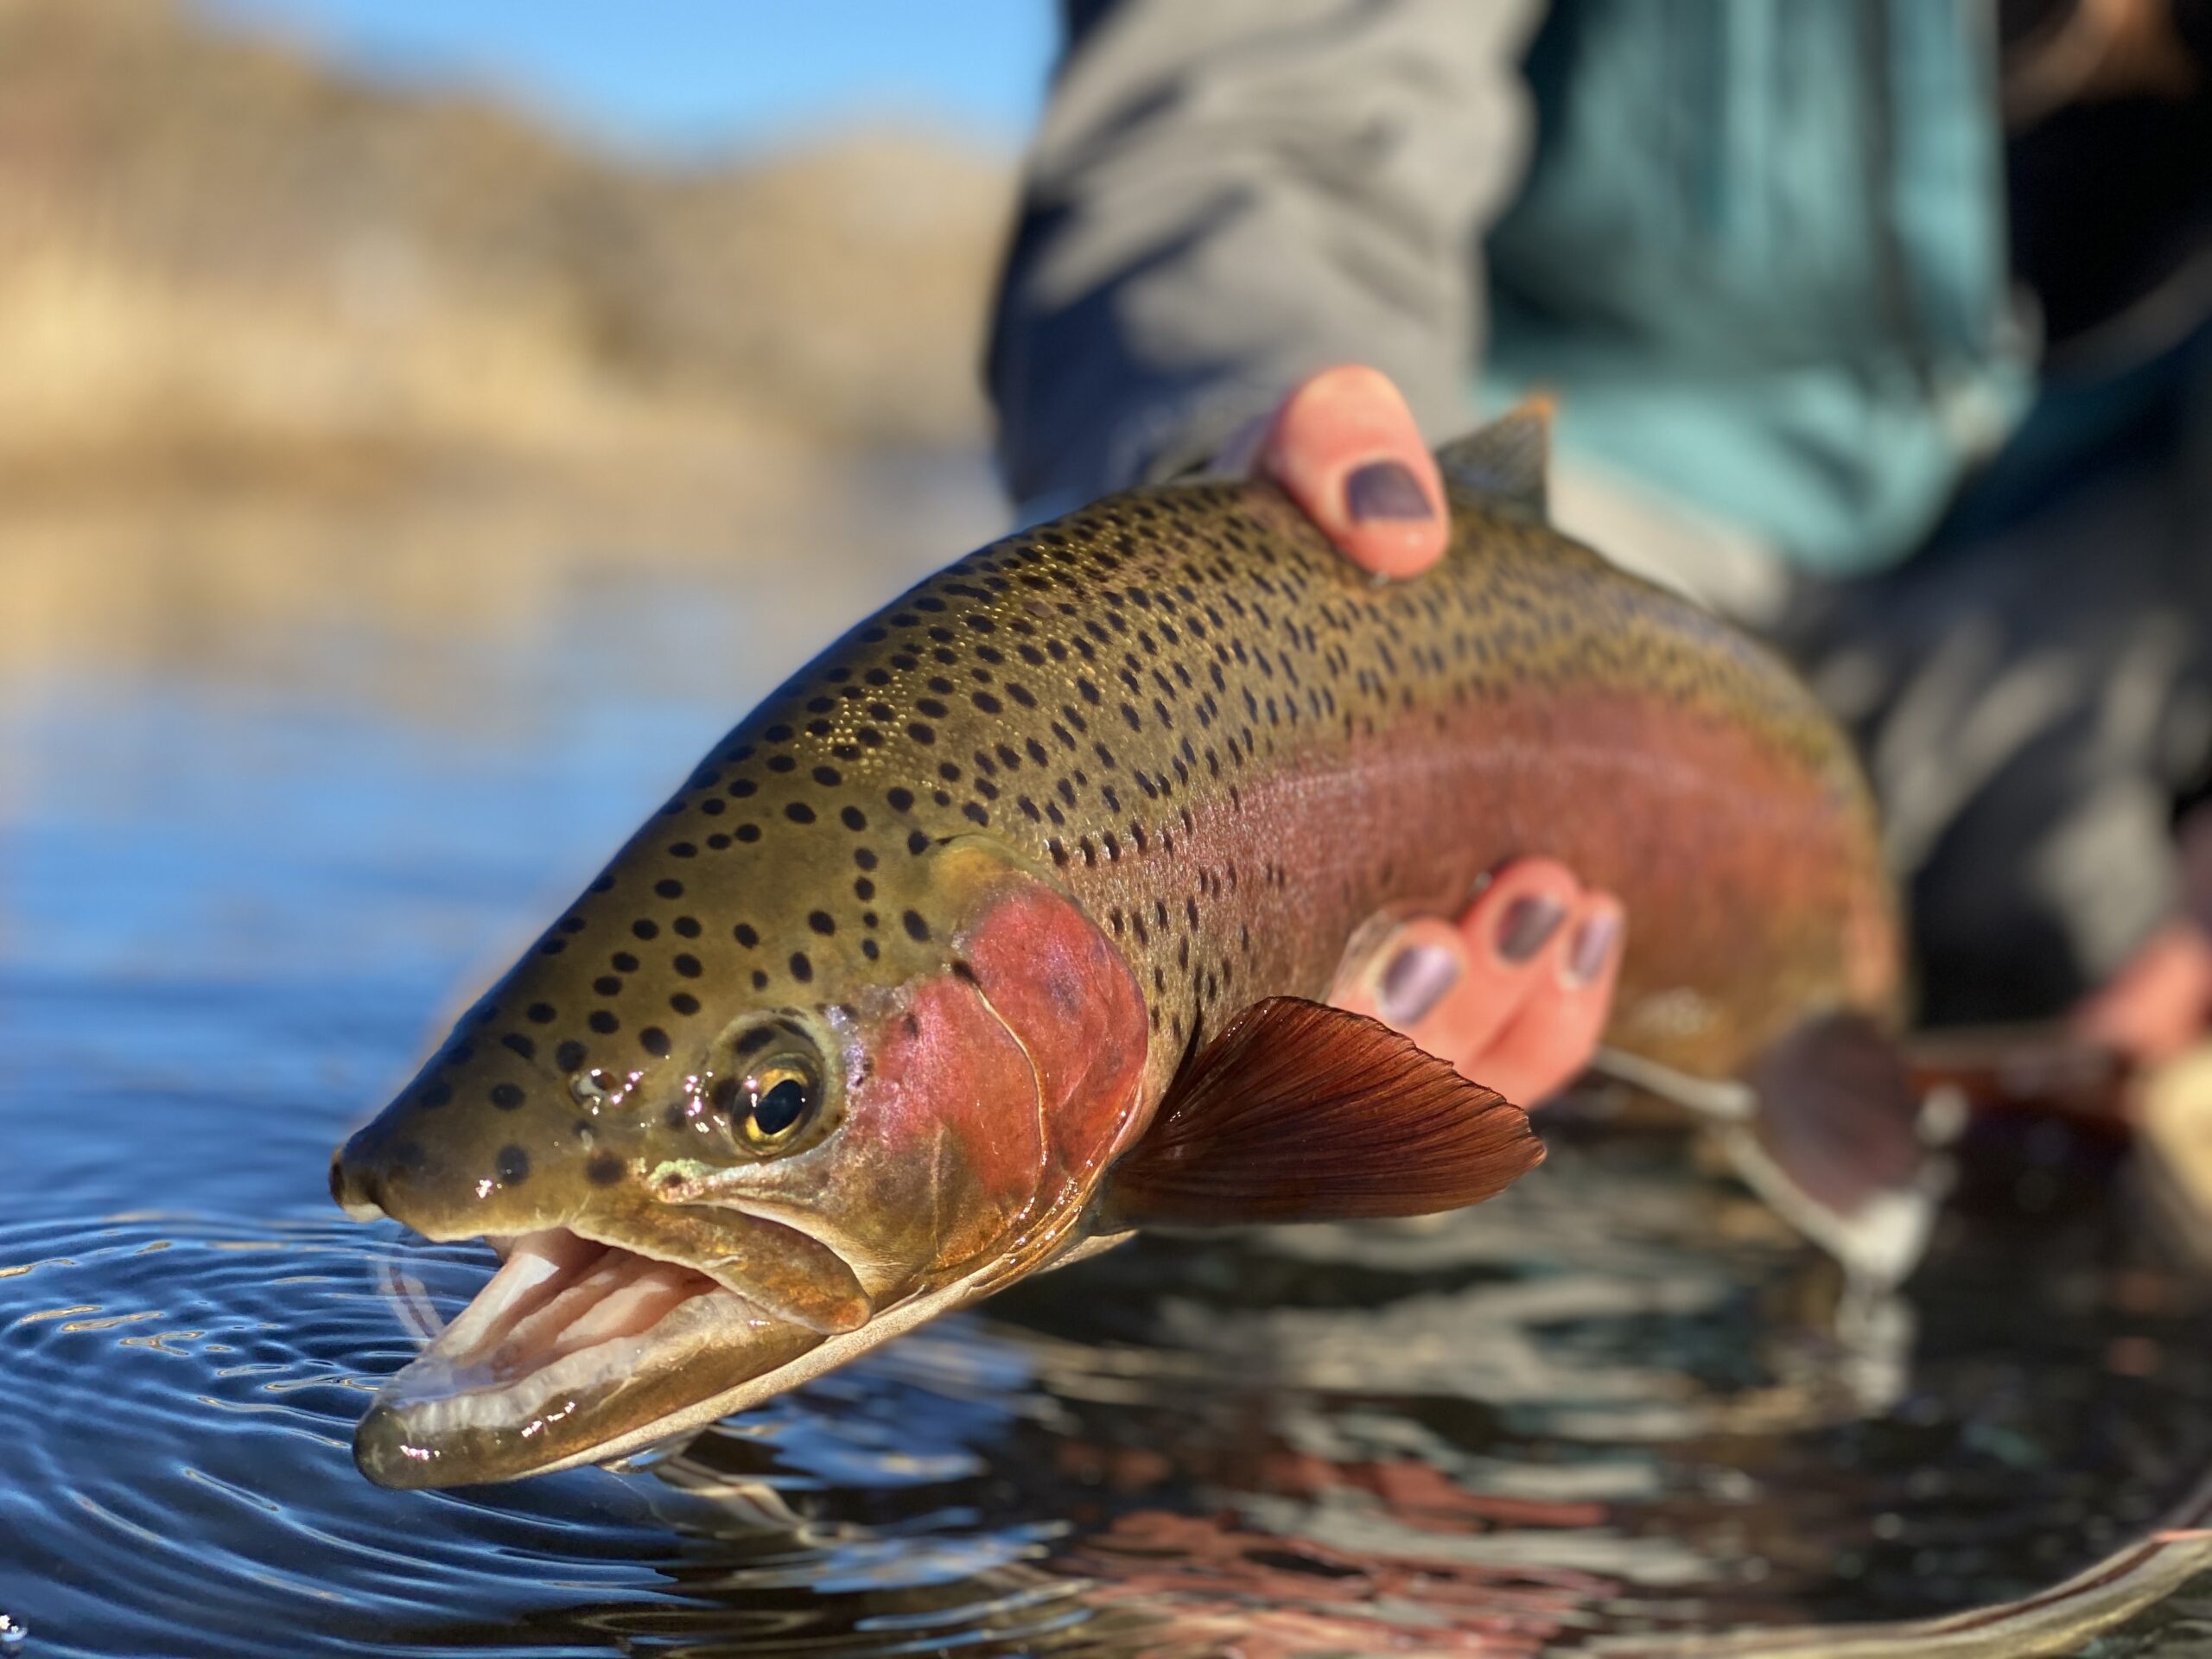 An angler holds a red rainbow trout caught during the spawn.